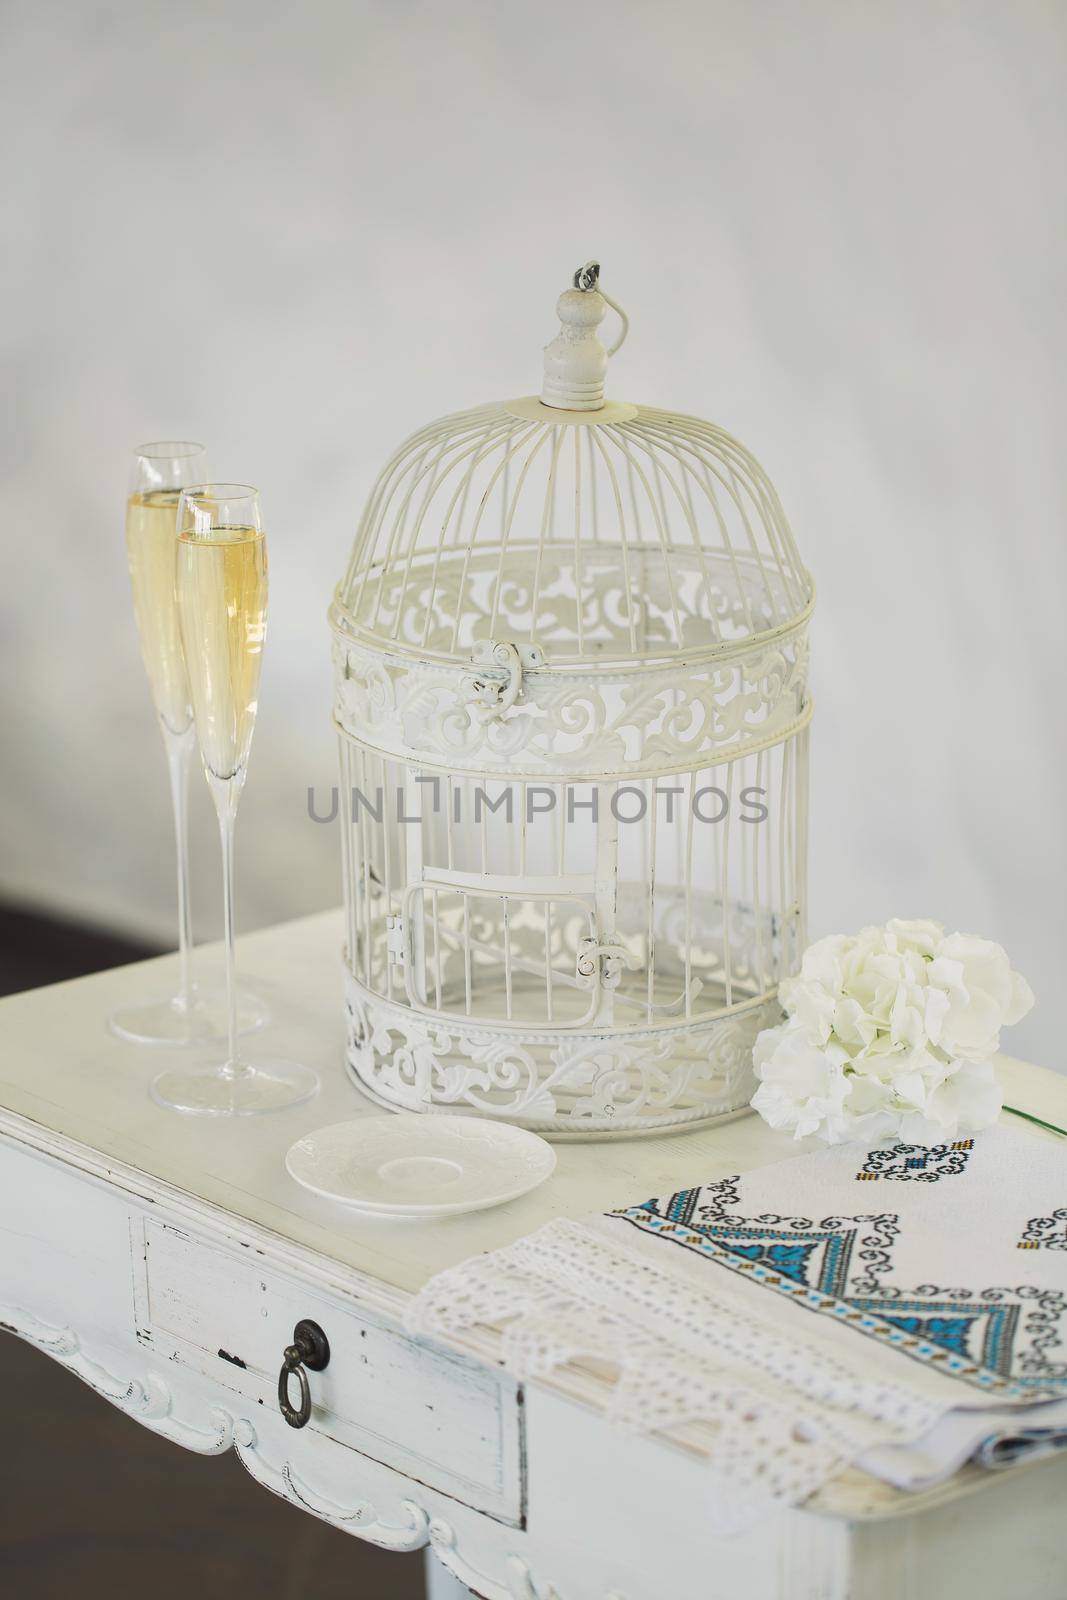 Wedding accessories: champagne glasses, cage, wedding towel by StudioPeace